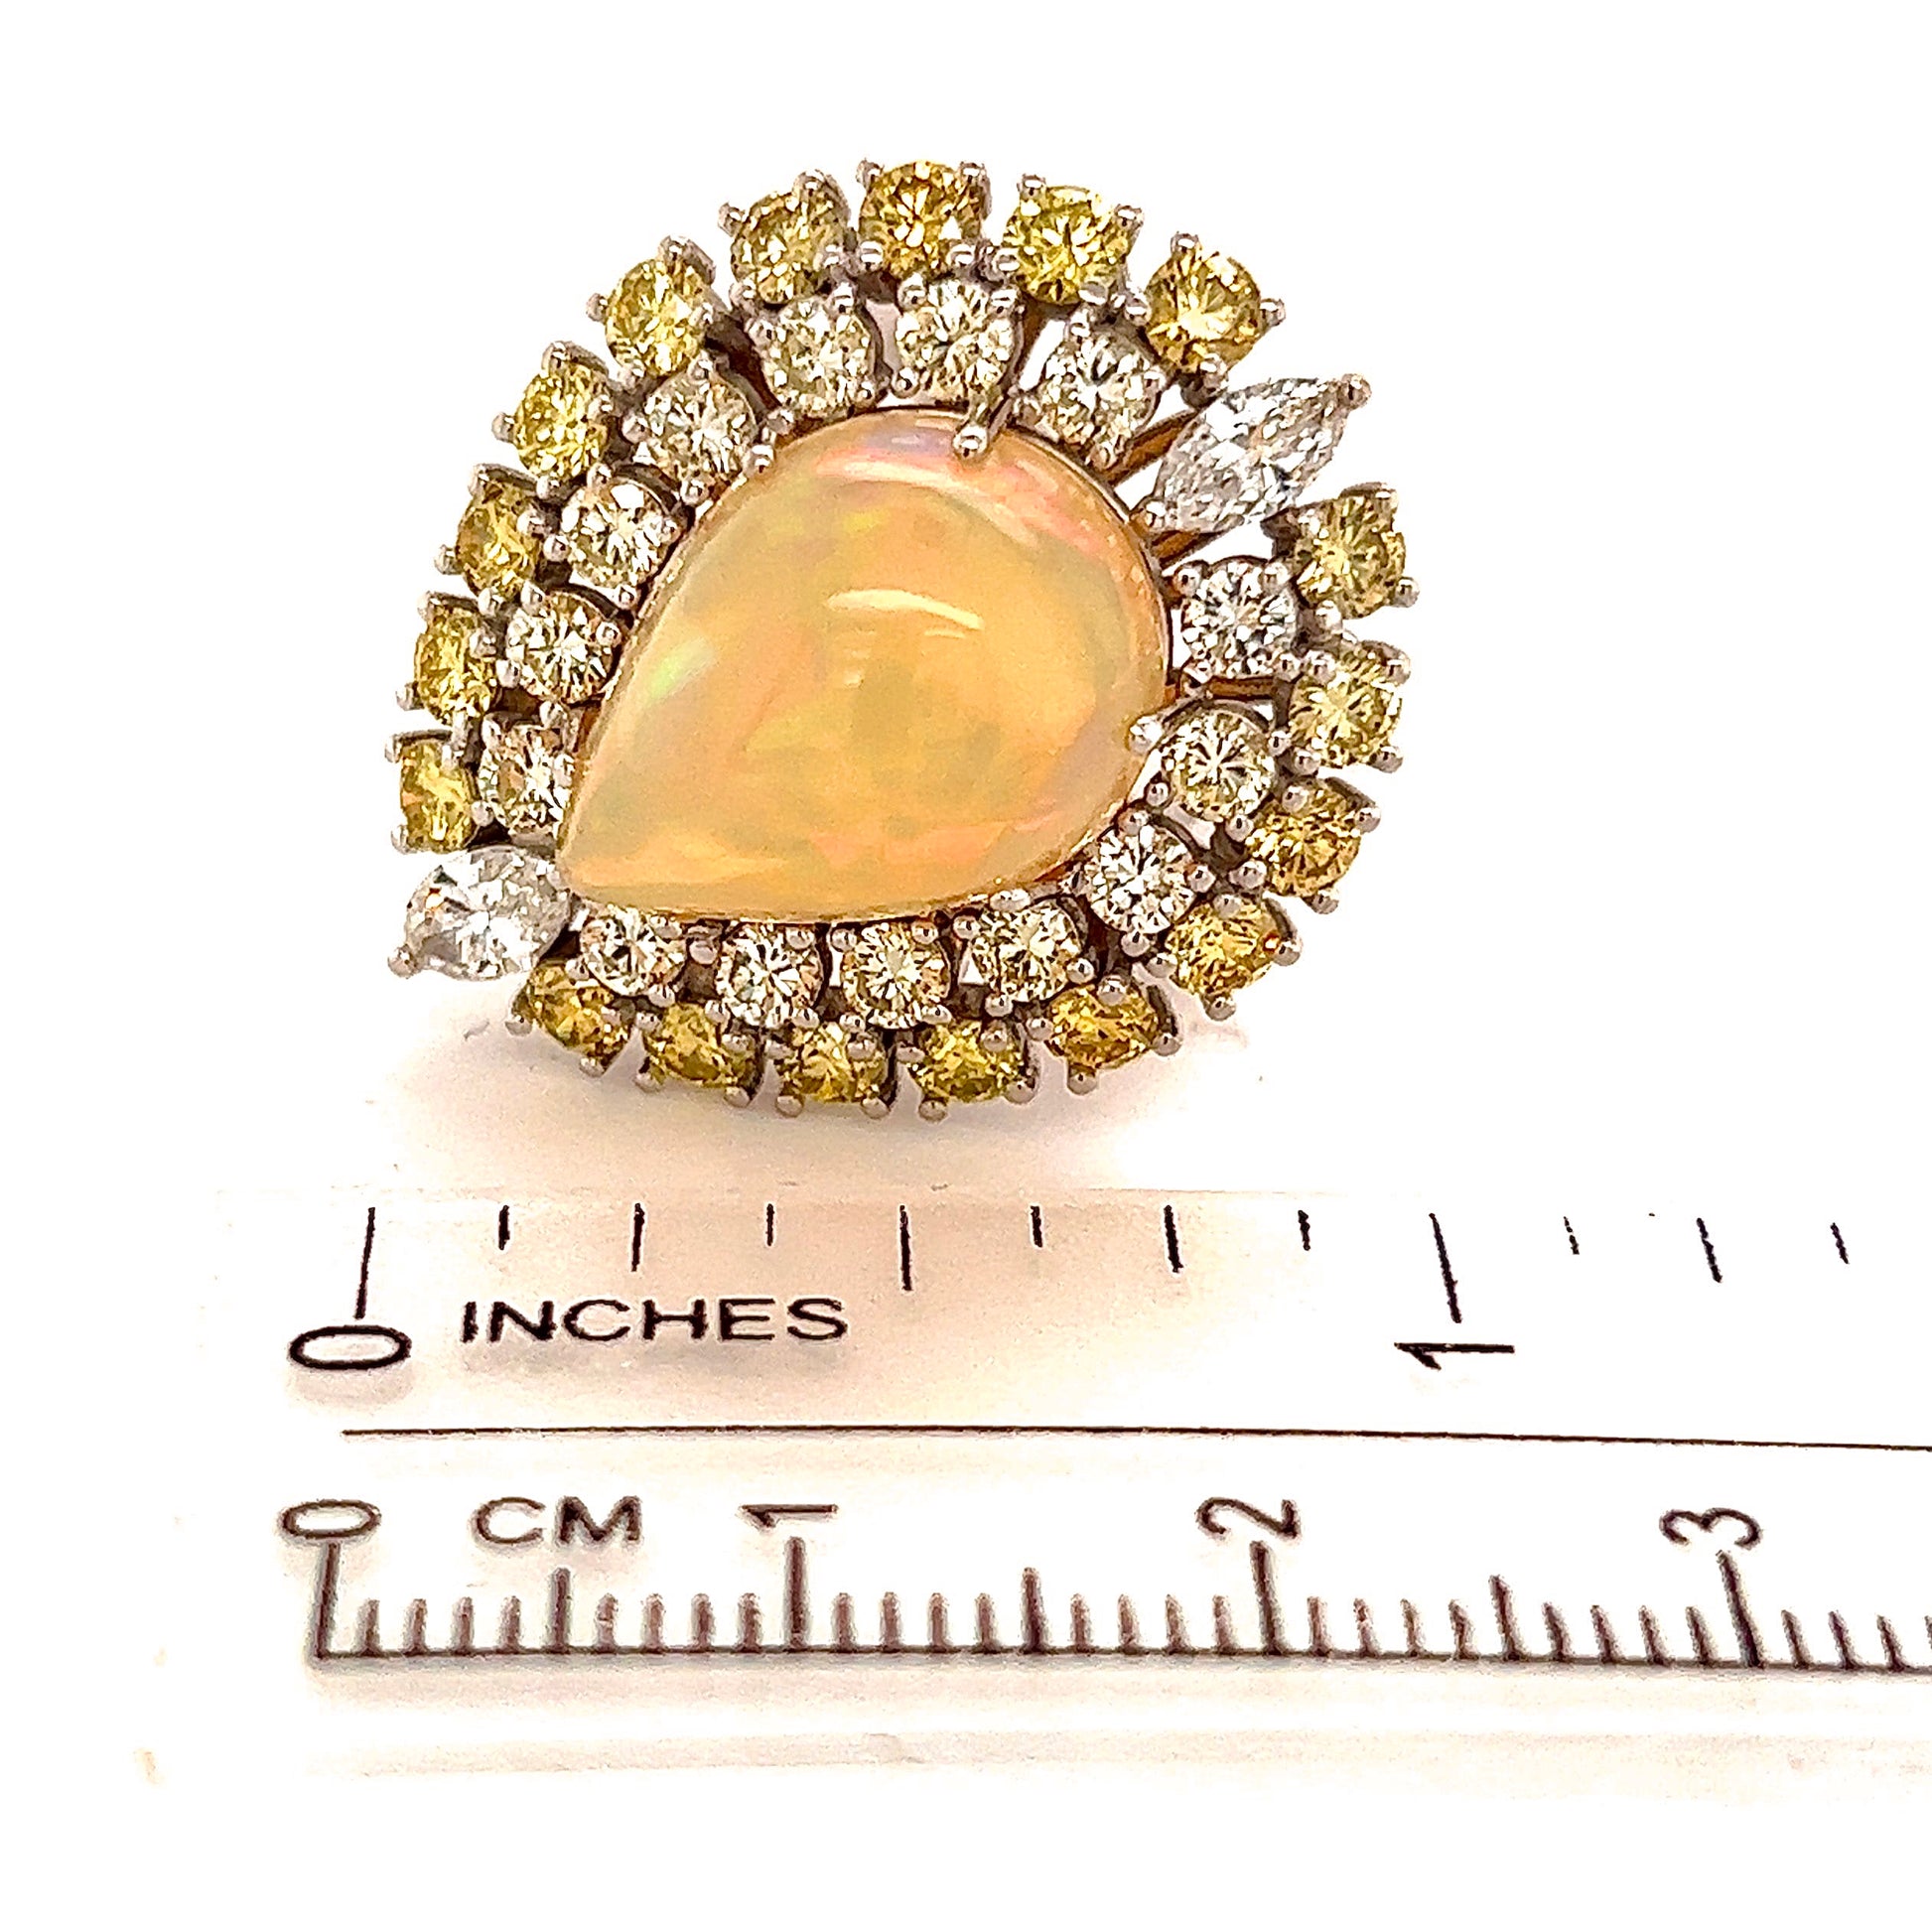 Natural White Opal Diamond Ring 14k Gold 11 TCW GIA  Certified $12,950 210739 - Certified Fine Jewelry